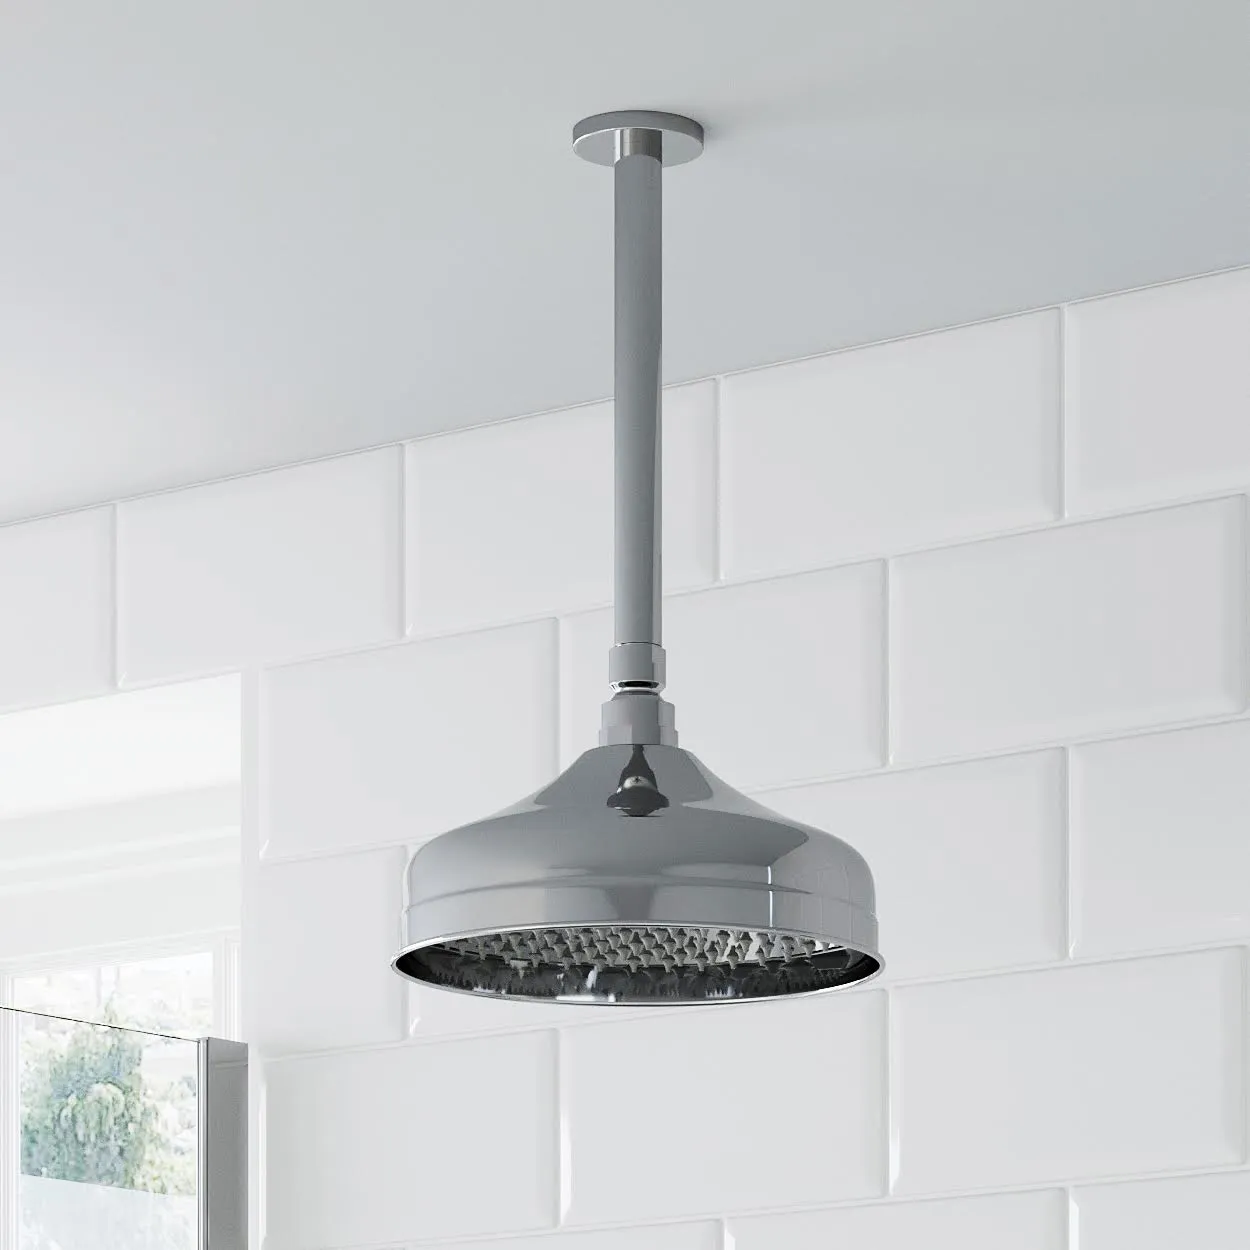 Park Lane Ceiling Mounted Traditional Drencher Shower Head